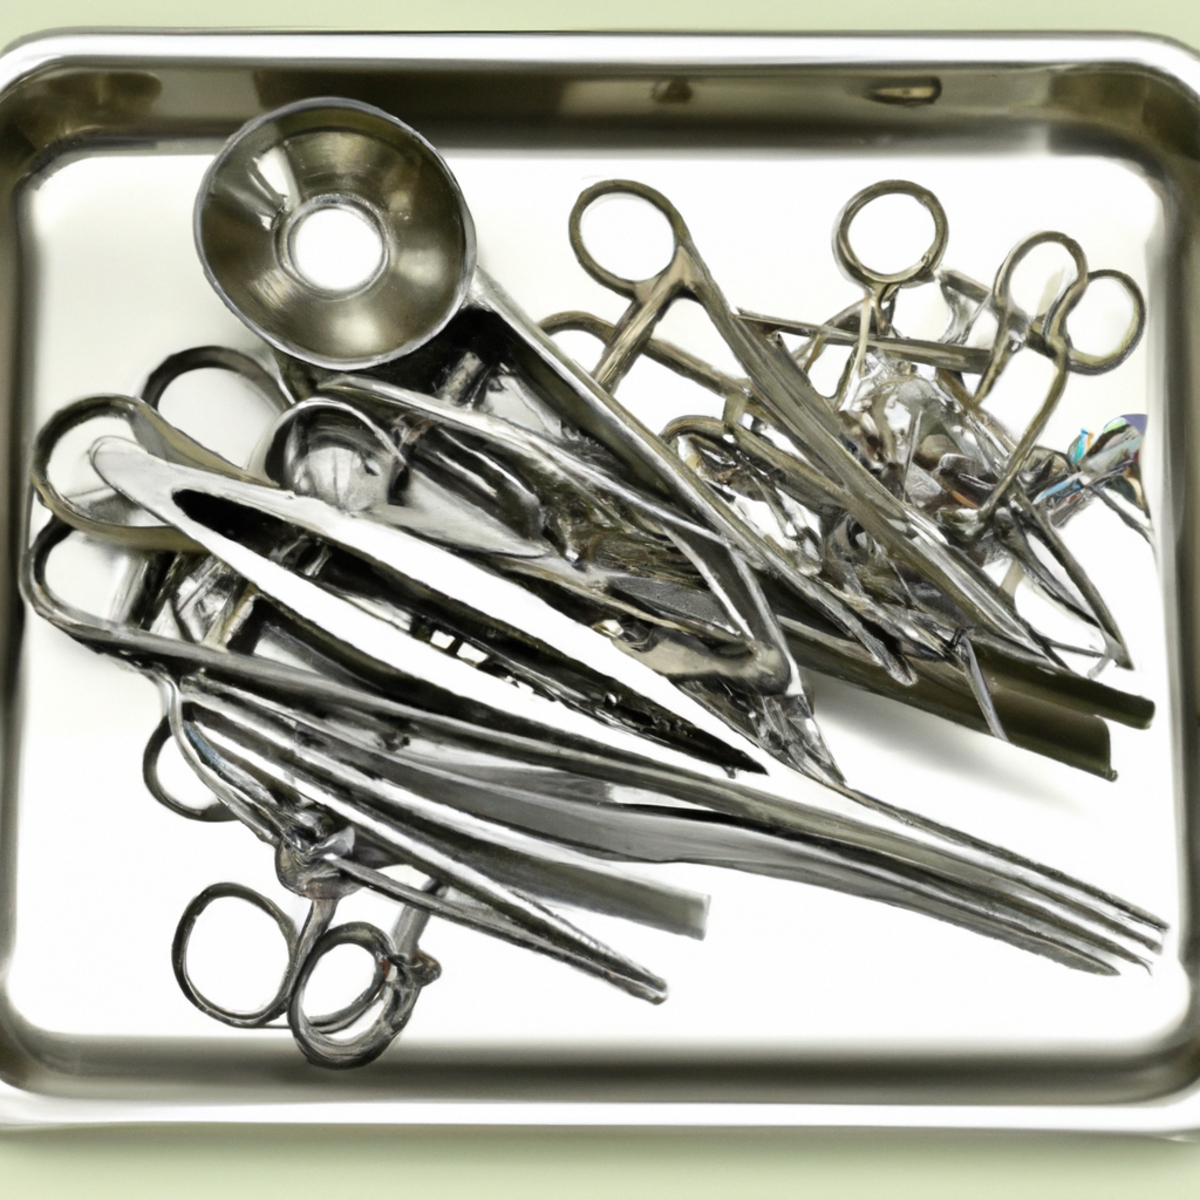 Surgical instrument tray with sterile scalpels, forceps, and retractors, reflecting bright lights in an operating room - Gallbladder Neuroendocrine Tumor 